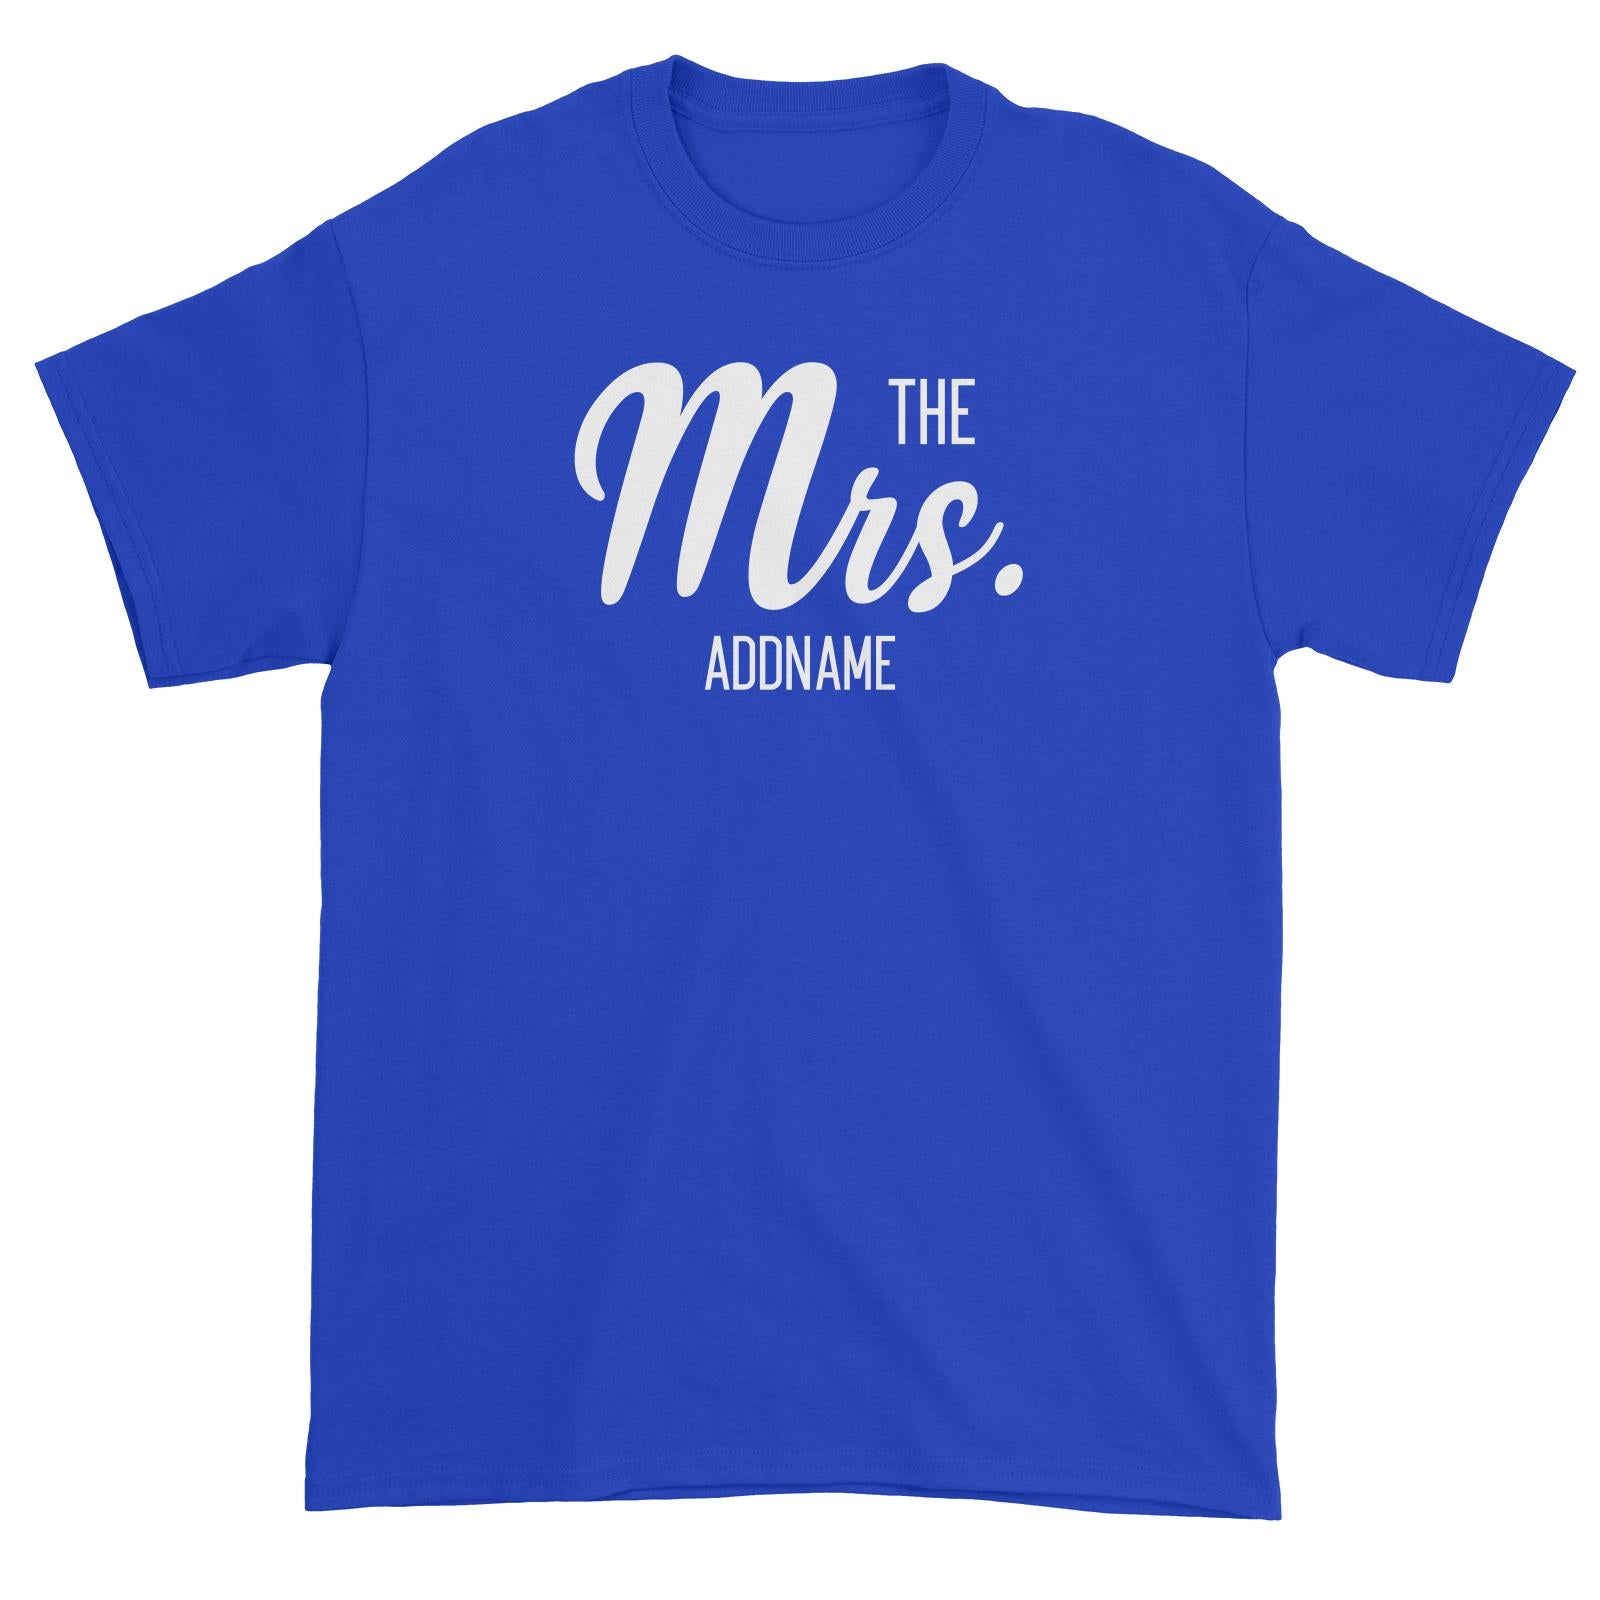 Husband and Wife The Mrs. Addname Unisex T-Shirt